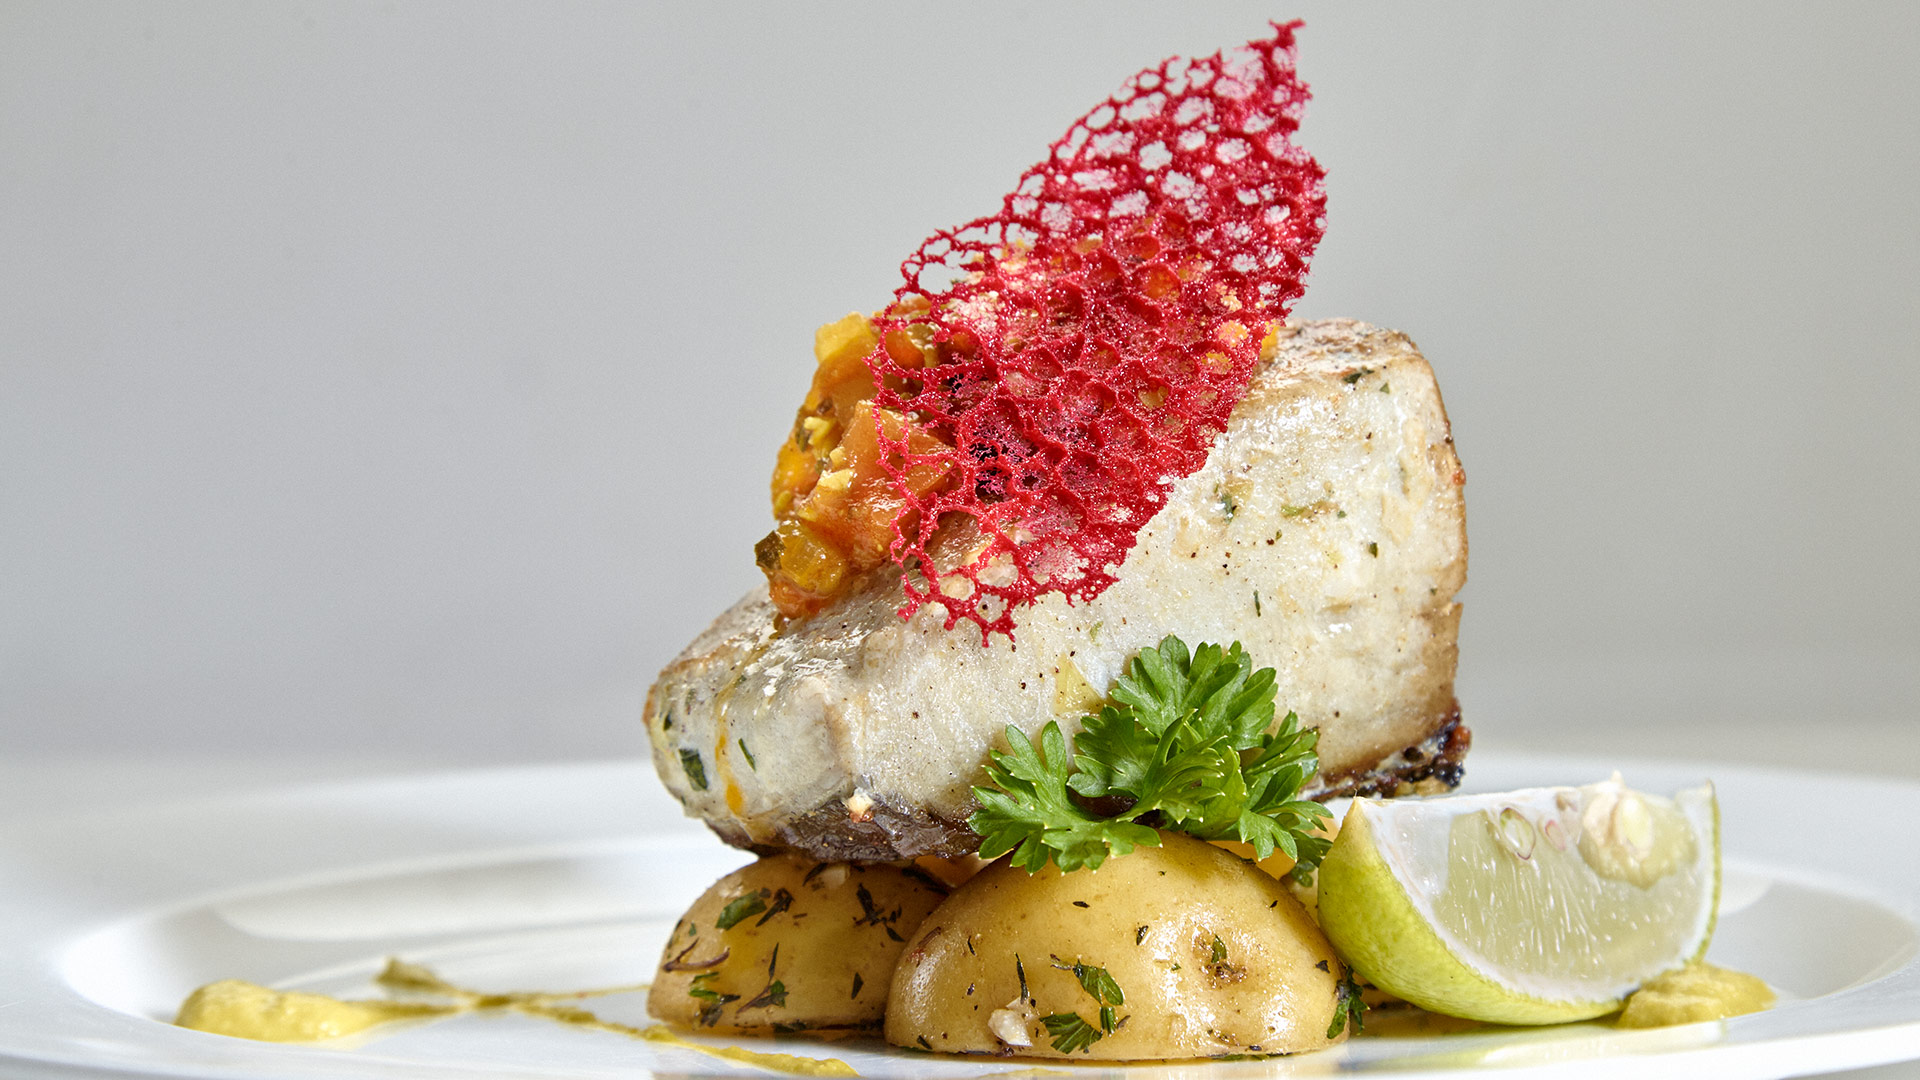 Butter basted King Fish napped with curried tomato concasse on Thyme infused fingerling potatoes & chive emulsion